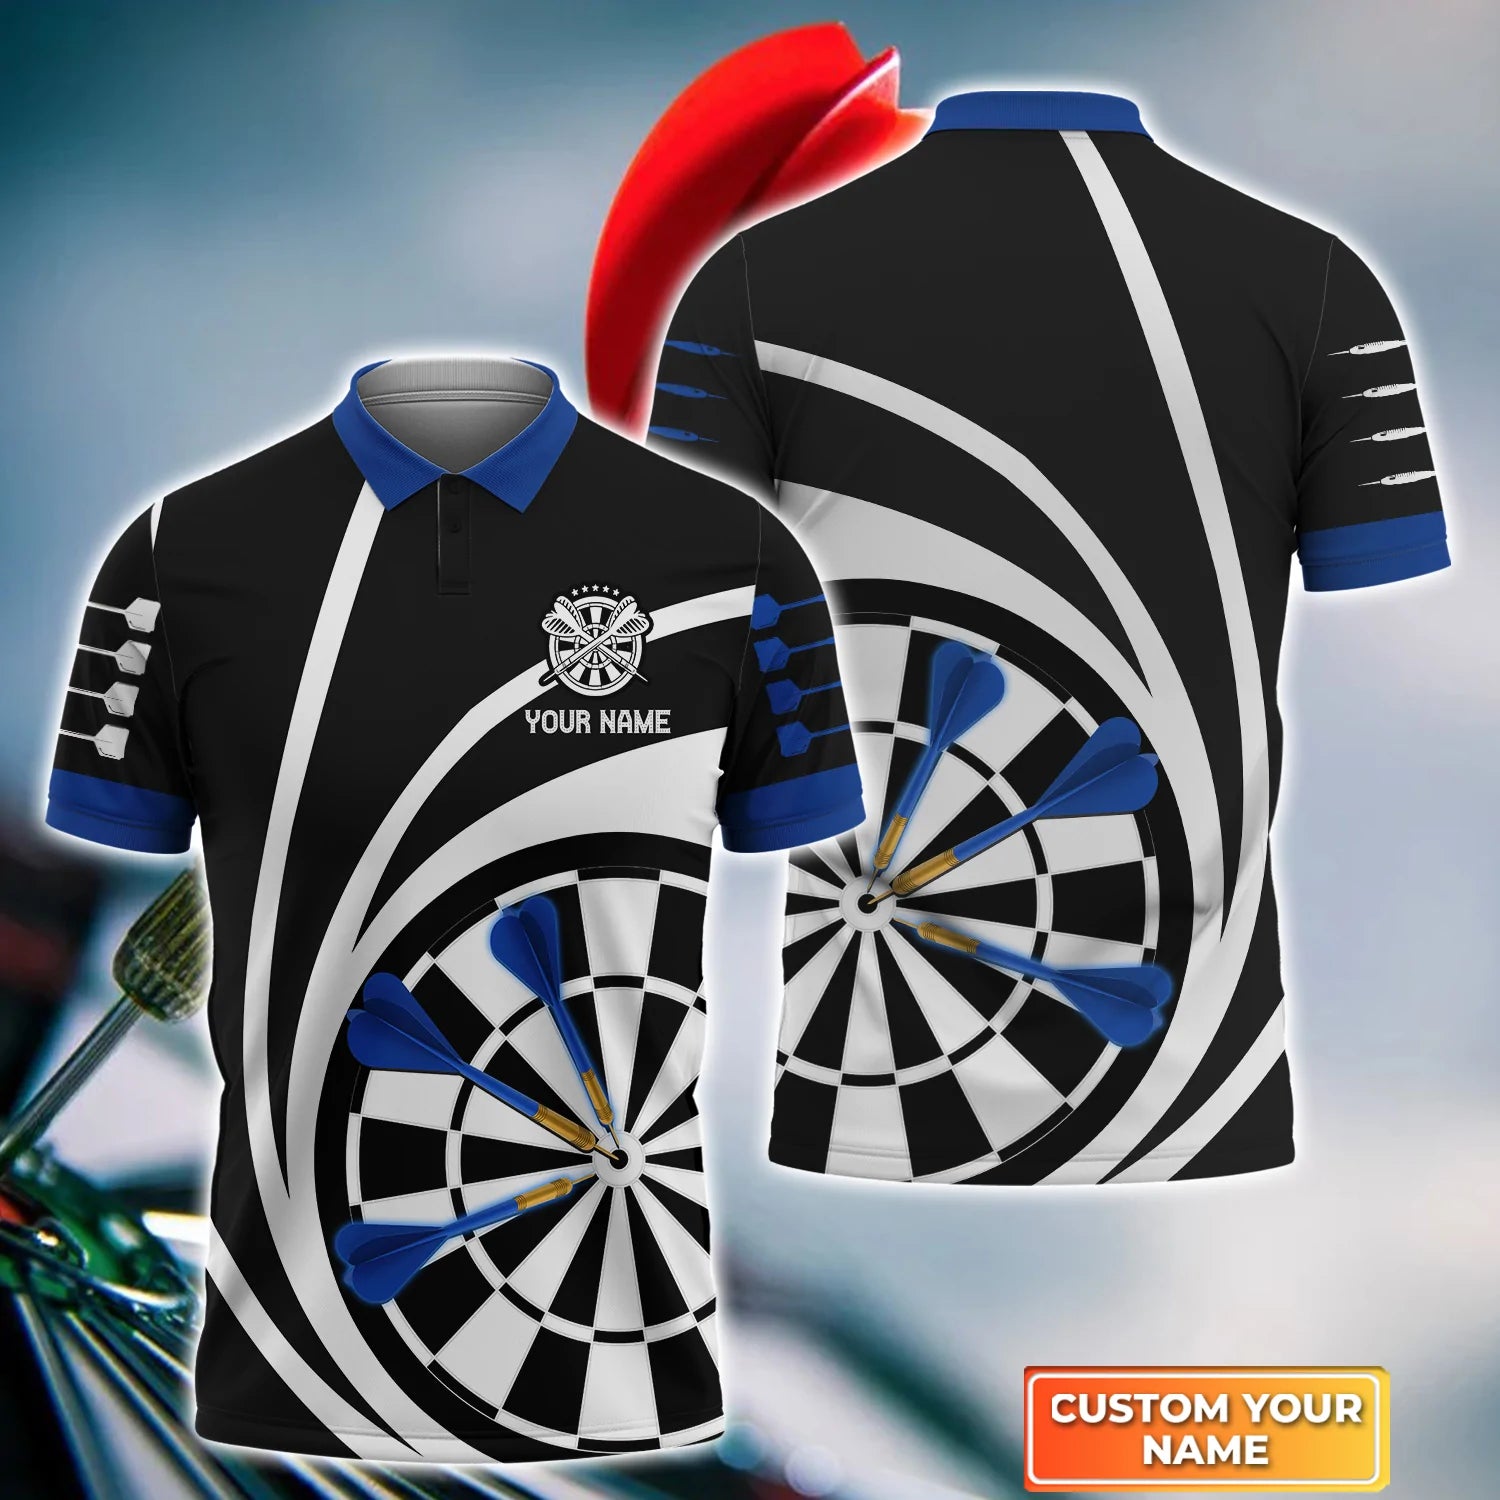 Customized 3D Polo Shirt with Personalized Name for Darts Enthusiasts: Ideal for Men’s Dart Polo Shirts and Dart Team Shirts – DP113